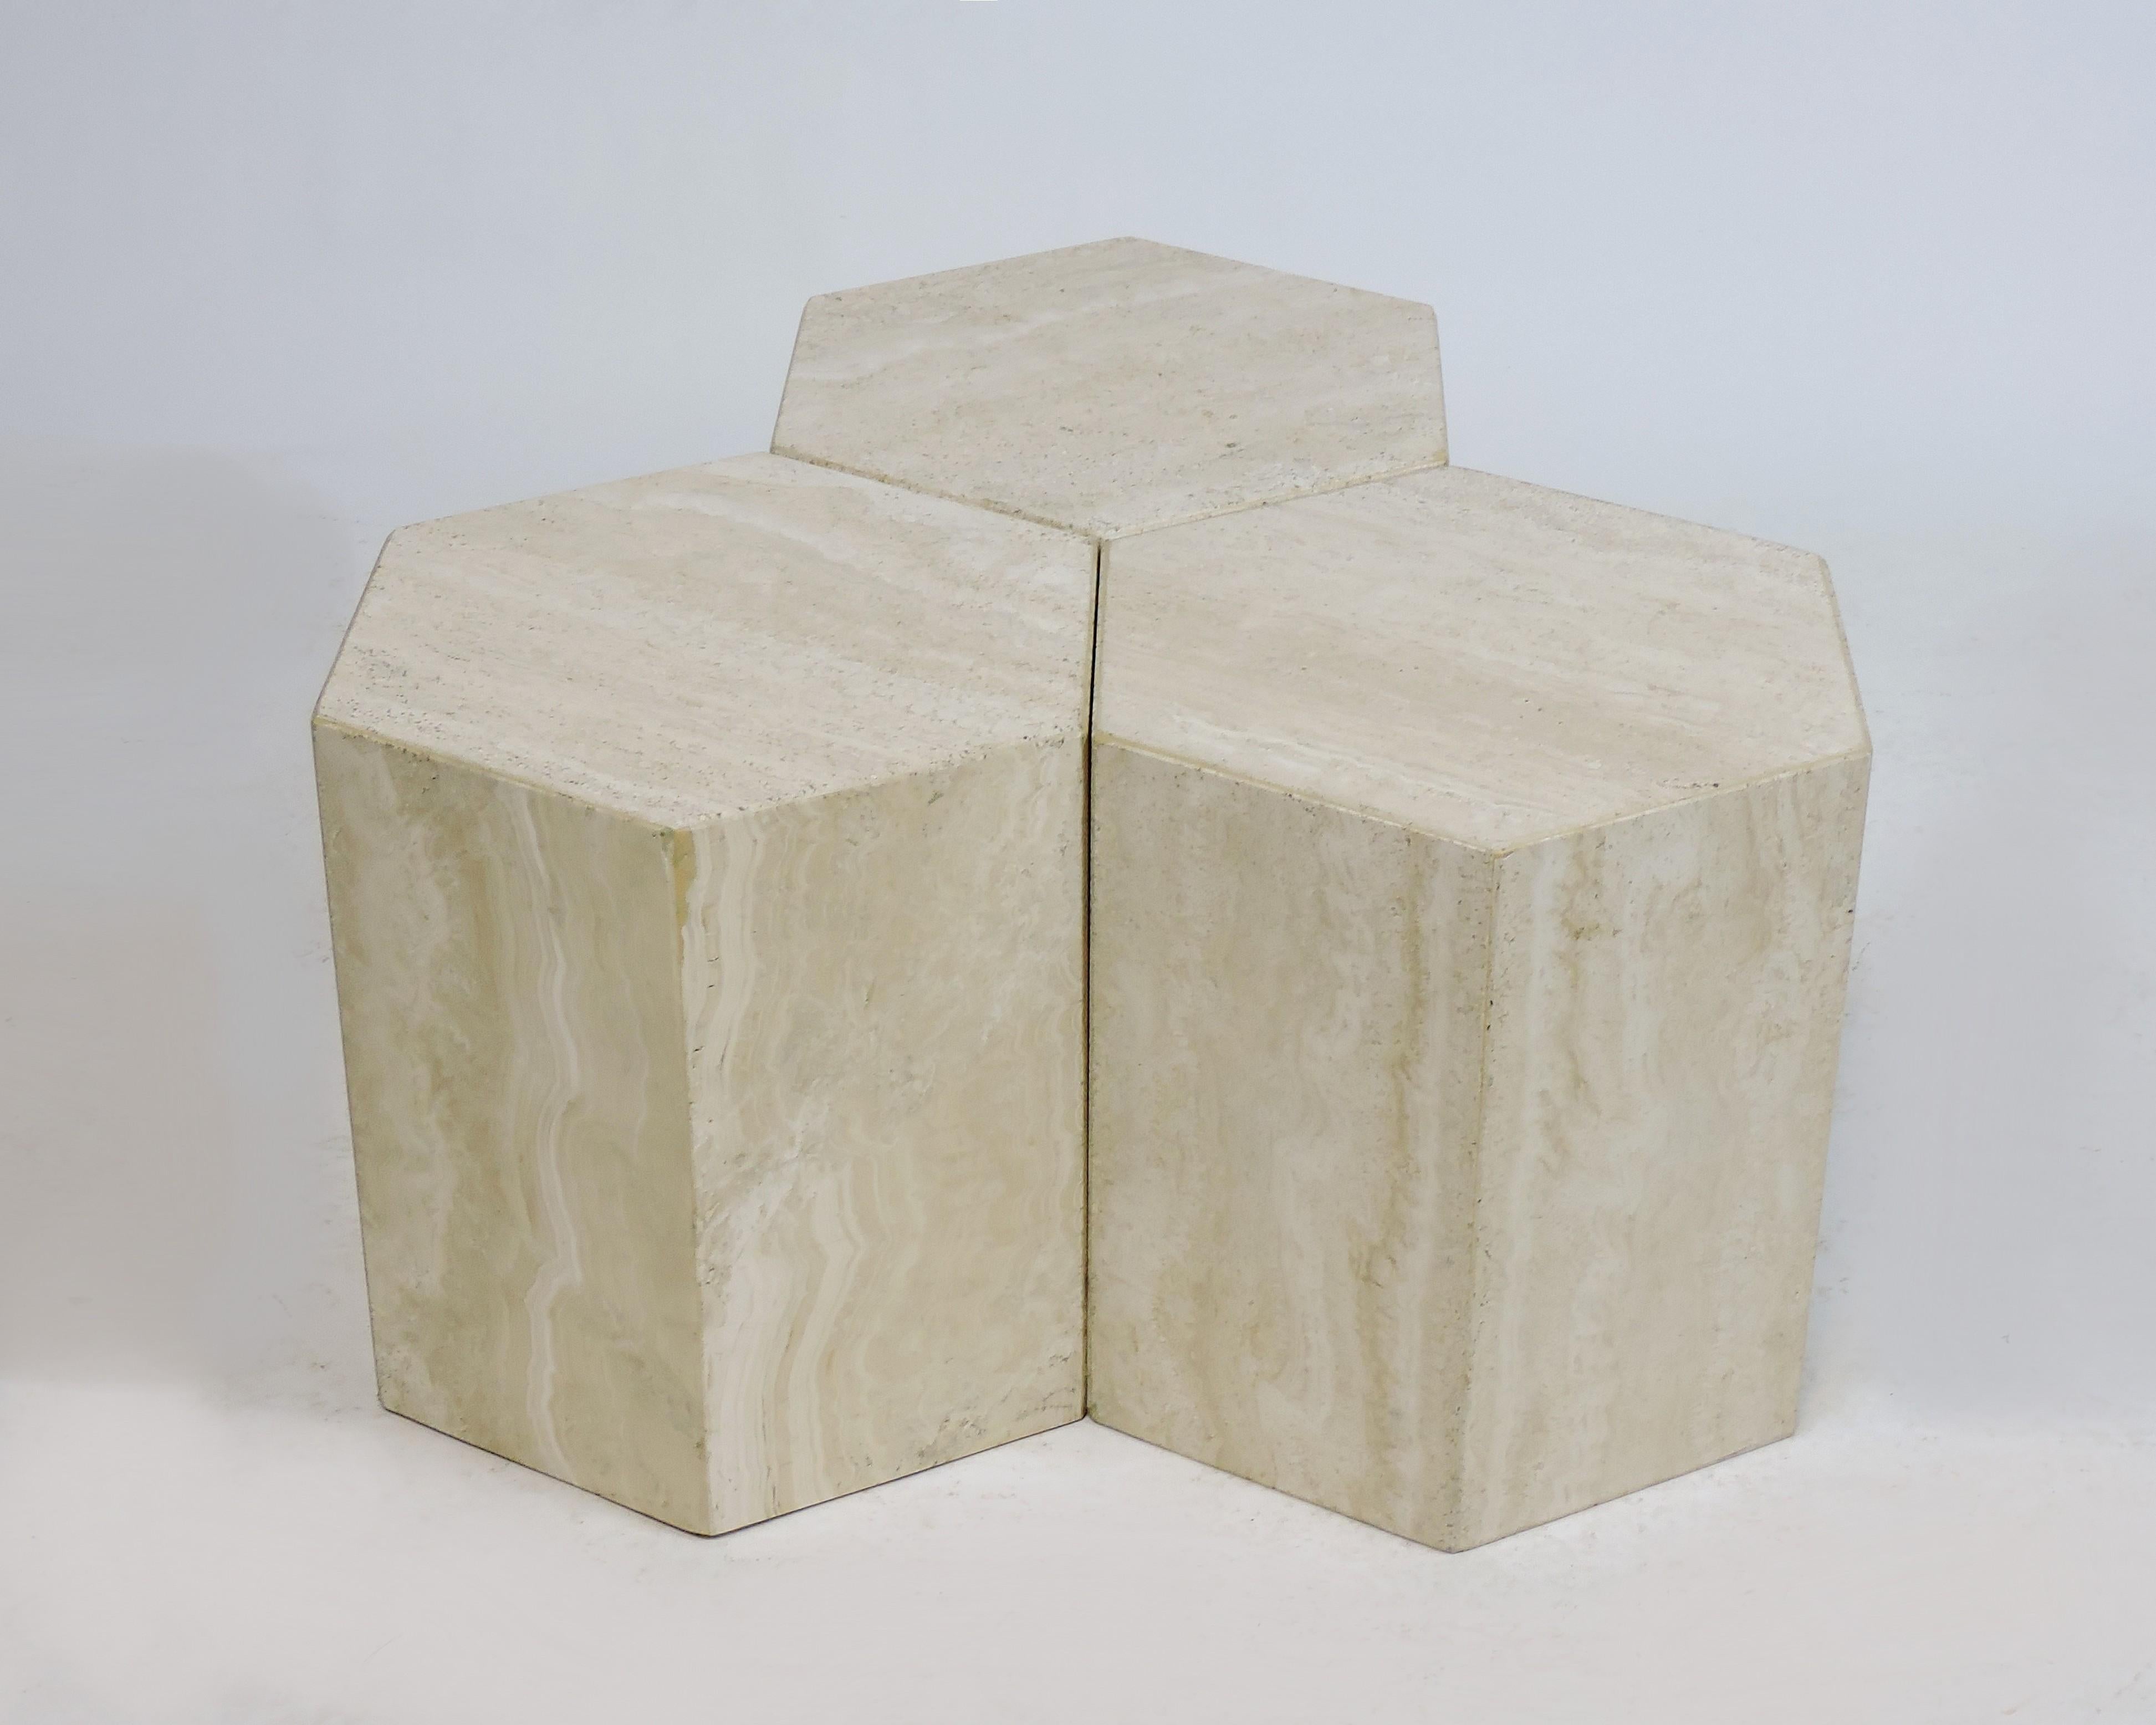 Beautiful set of three Italian modern travertine tables from the 1970s. These tables are fabricated from 3/4